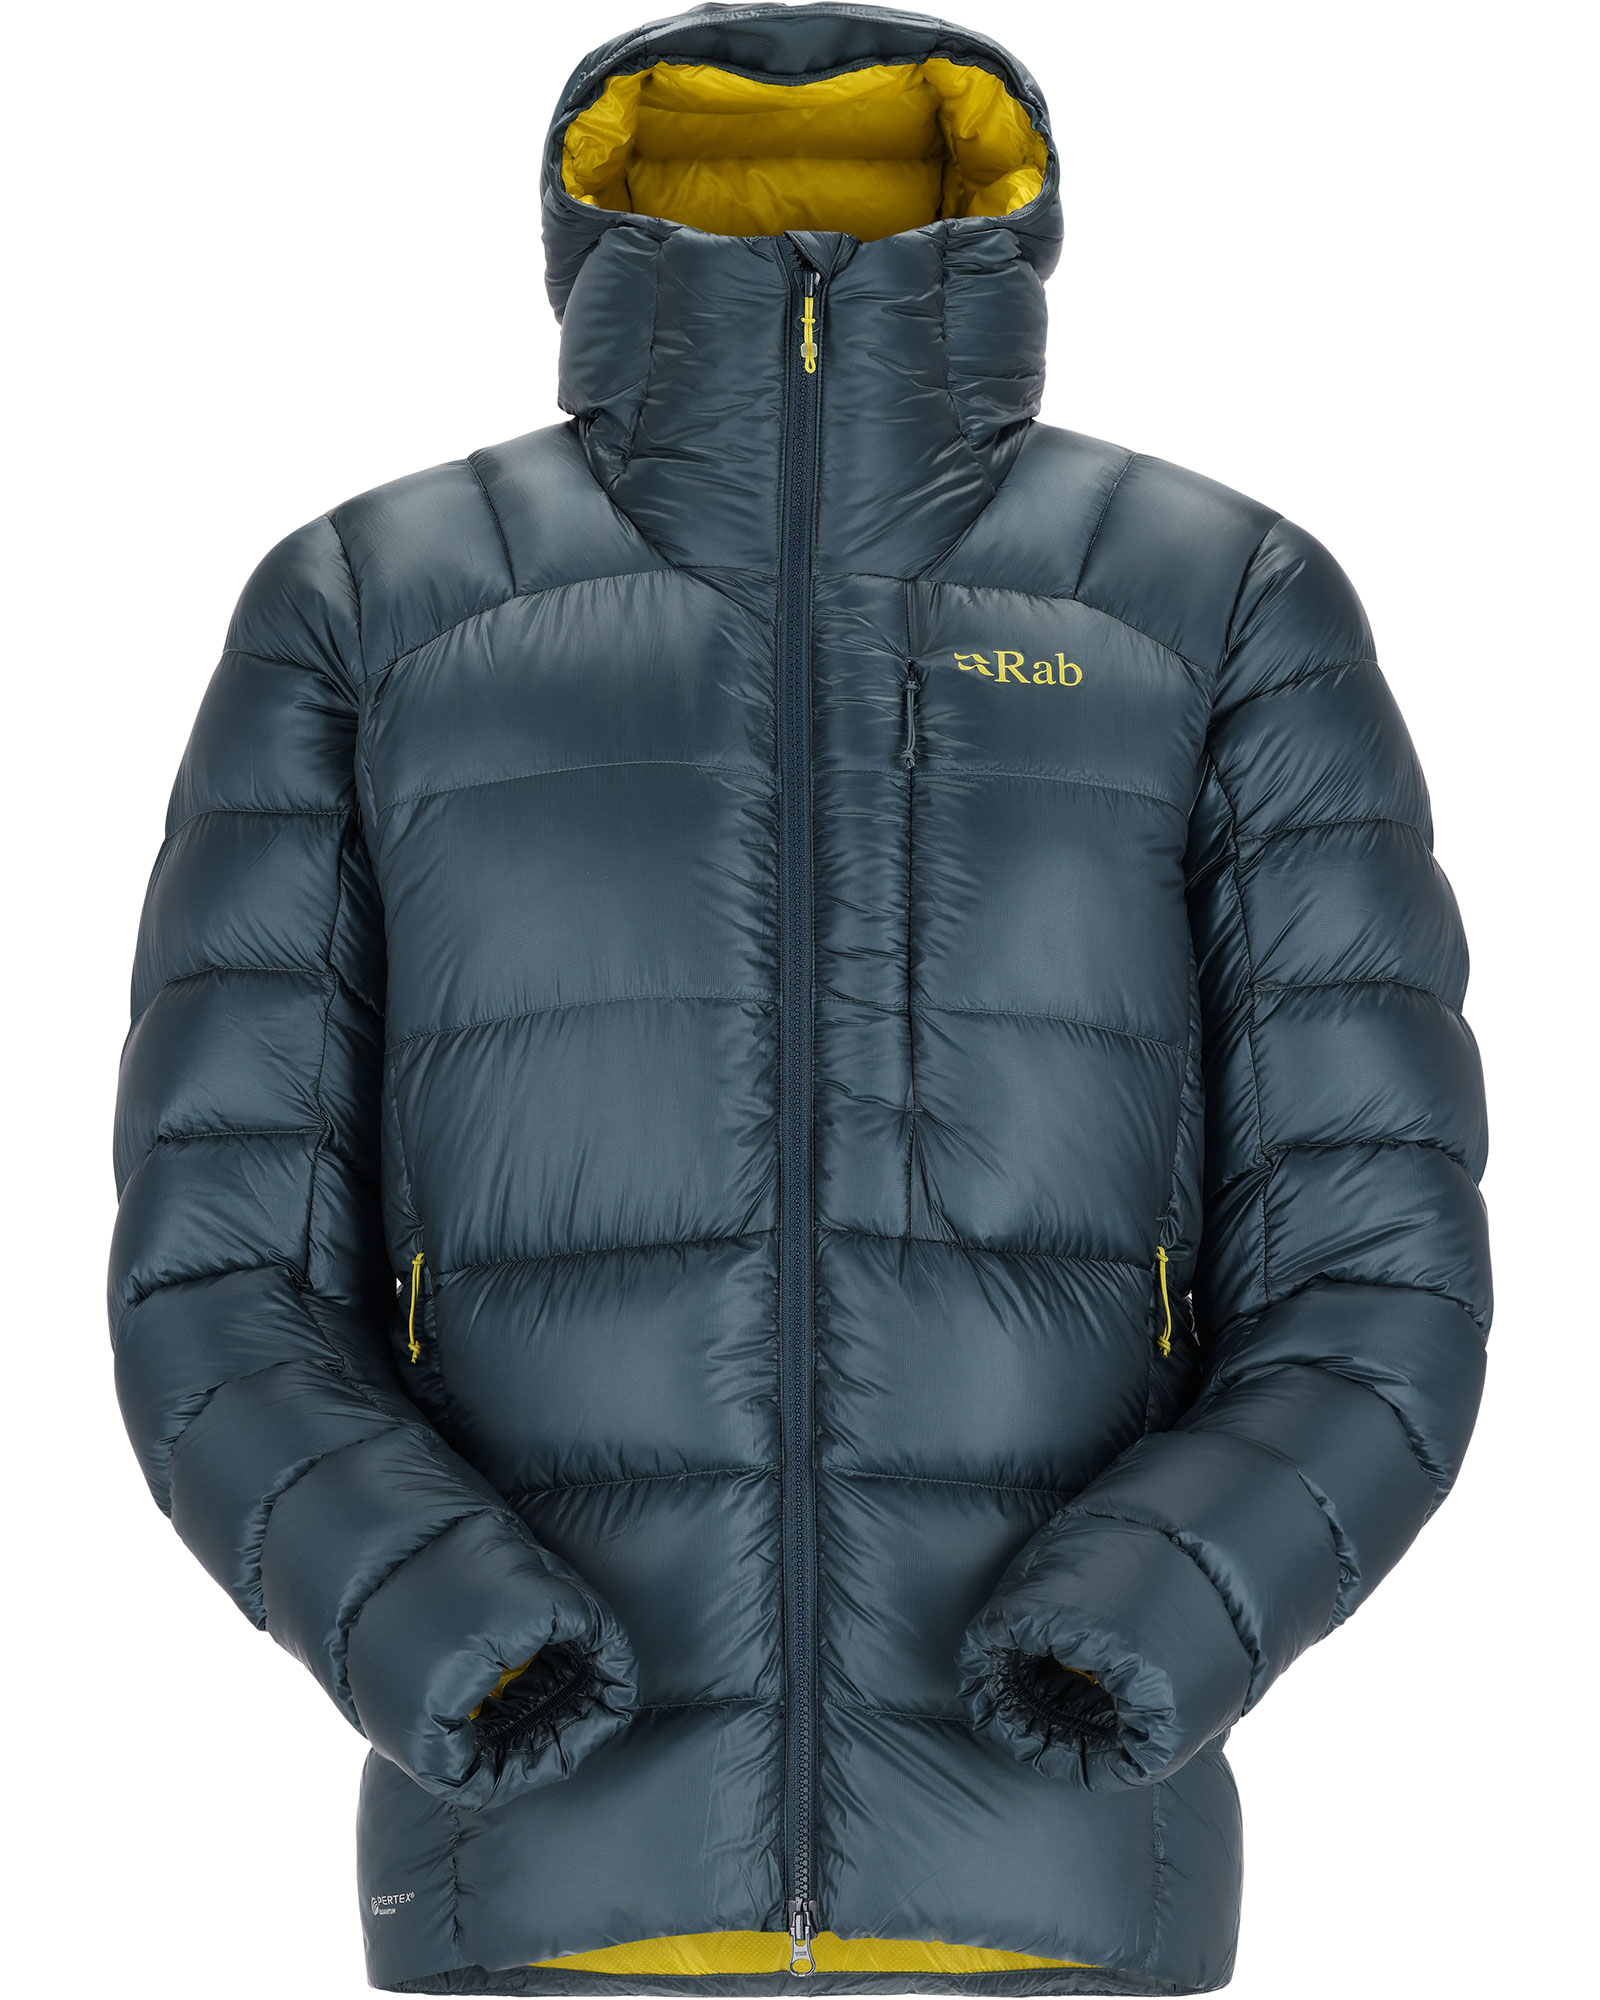 Rab Mythic Ultra Men’s Down Jacket - Orion Blue S